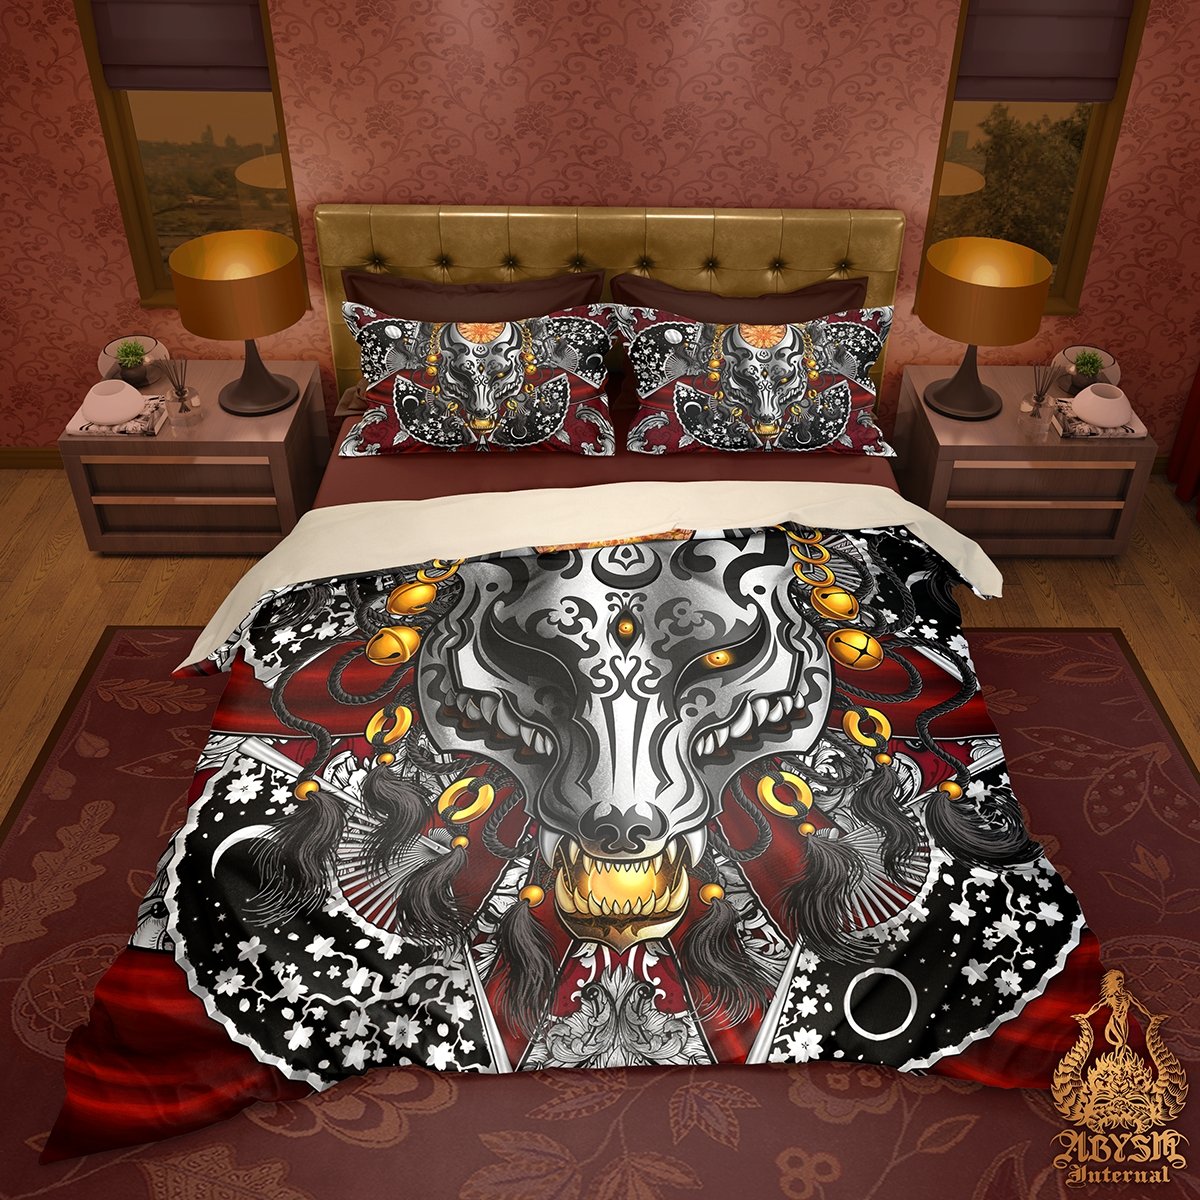 Kitsune Mask Bedding Set, Comforter and Duvet, Fox Okami and Anime Bed Cover and Bedroom Decor, King, Queen and Twin Size - Silver - Abysm Internal